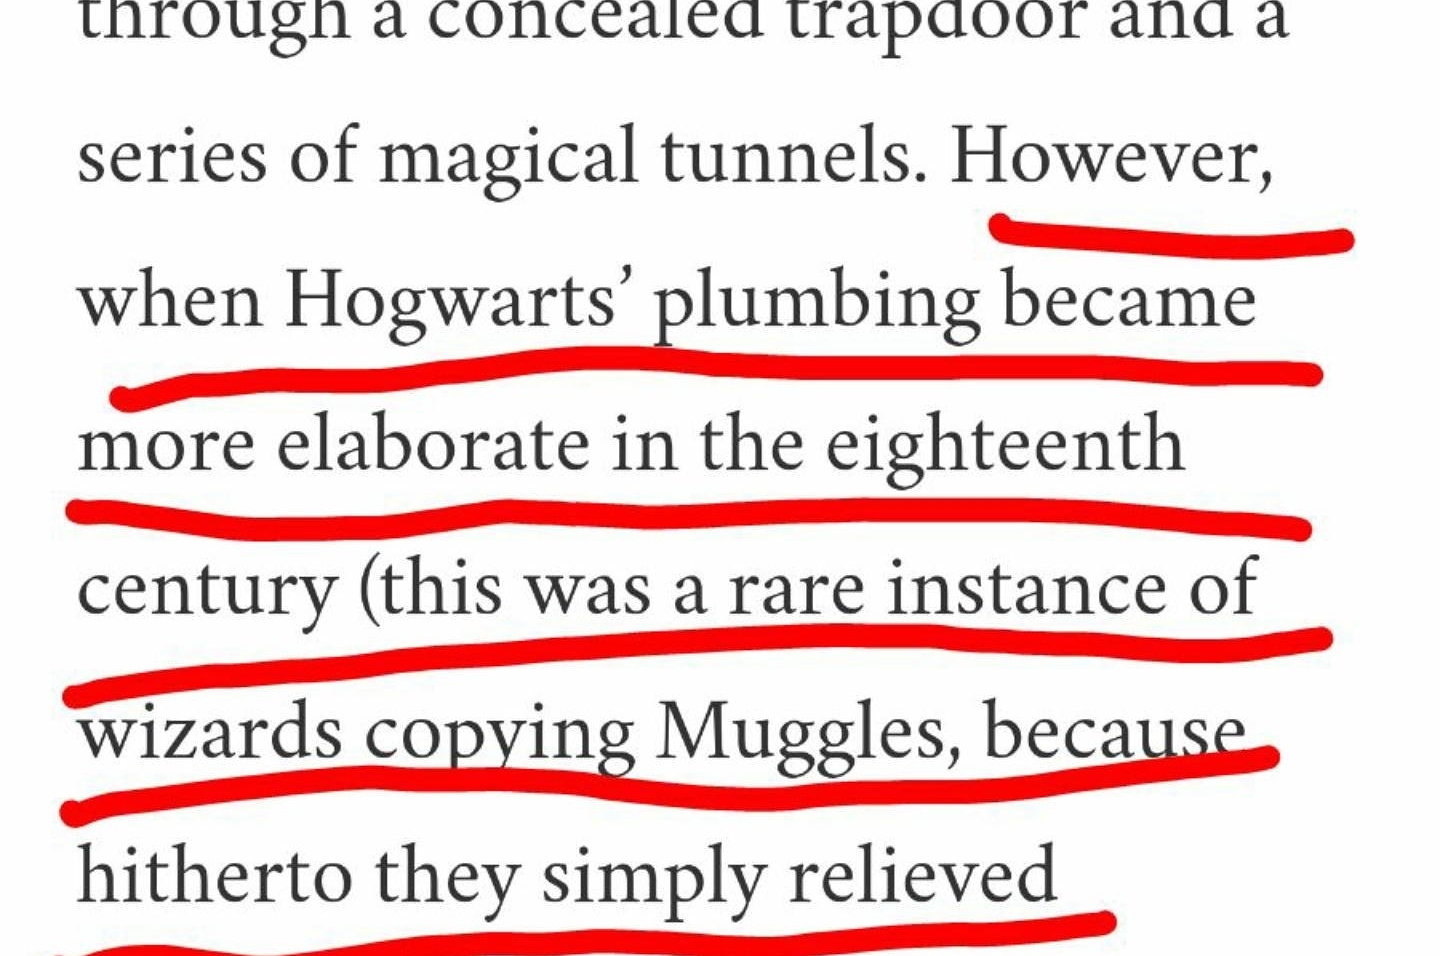 This One Sentence Written By J.K. Rowling Will Horrify You